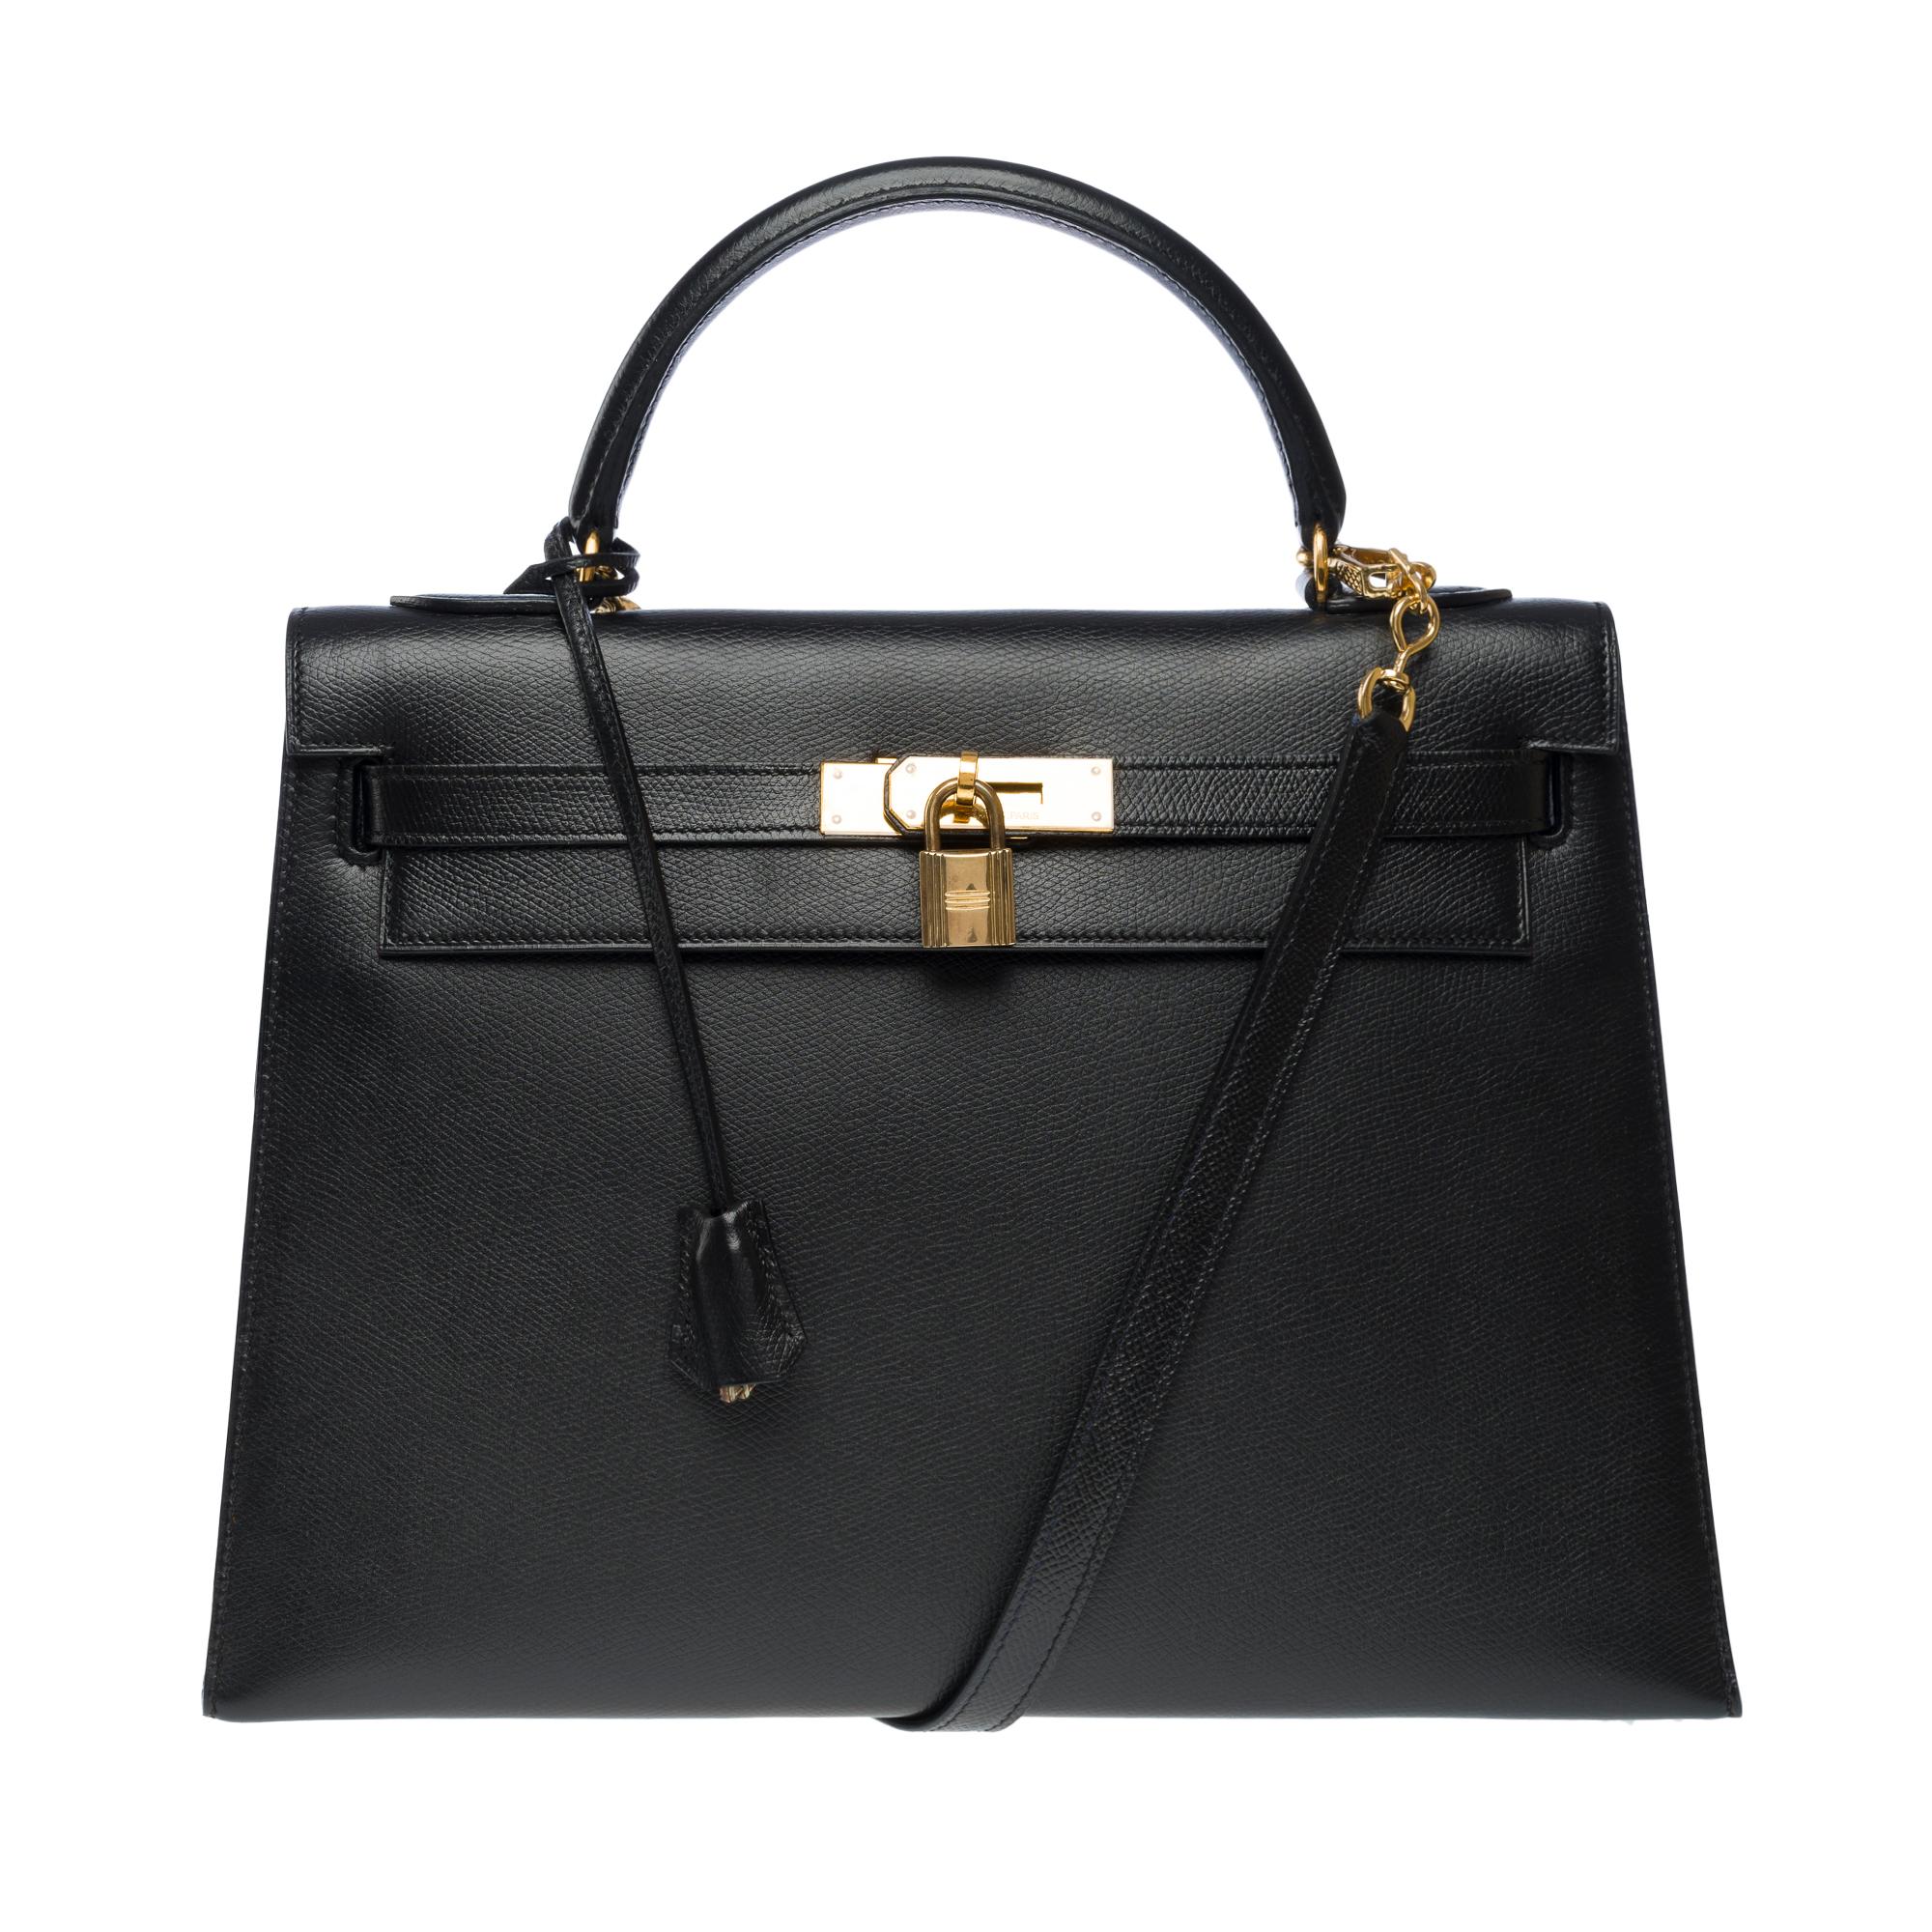 Beautiful​ ​Hermes​ ​Kelly​ ​32​ ​sellier​ ​handbag​ ​strap​ ​in​ ​black​ ​Courchevel​ ​leather,​ ​gold​ ​plated​ ​metal​ ​trim,​ ​black​ ​leather​ ​handle,​ ​removable​ ​shoulder​ ​strap​ ​handle​ ​compatible​ ​not​ ​original​ ​(produced​ ​by​